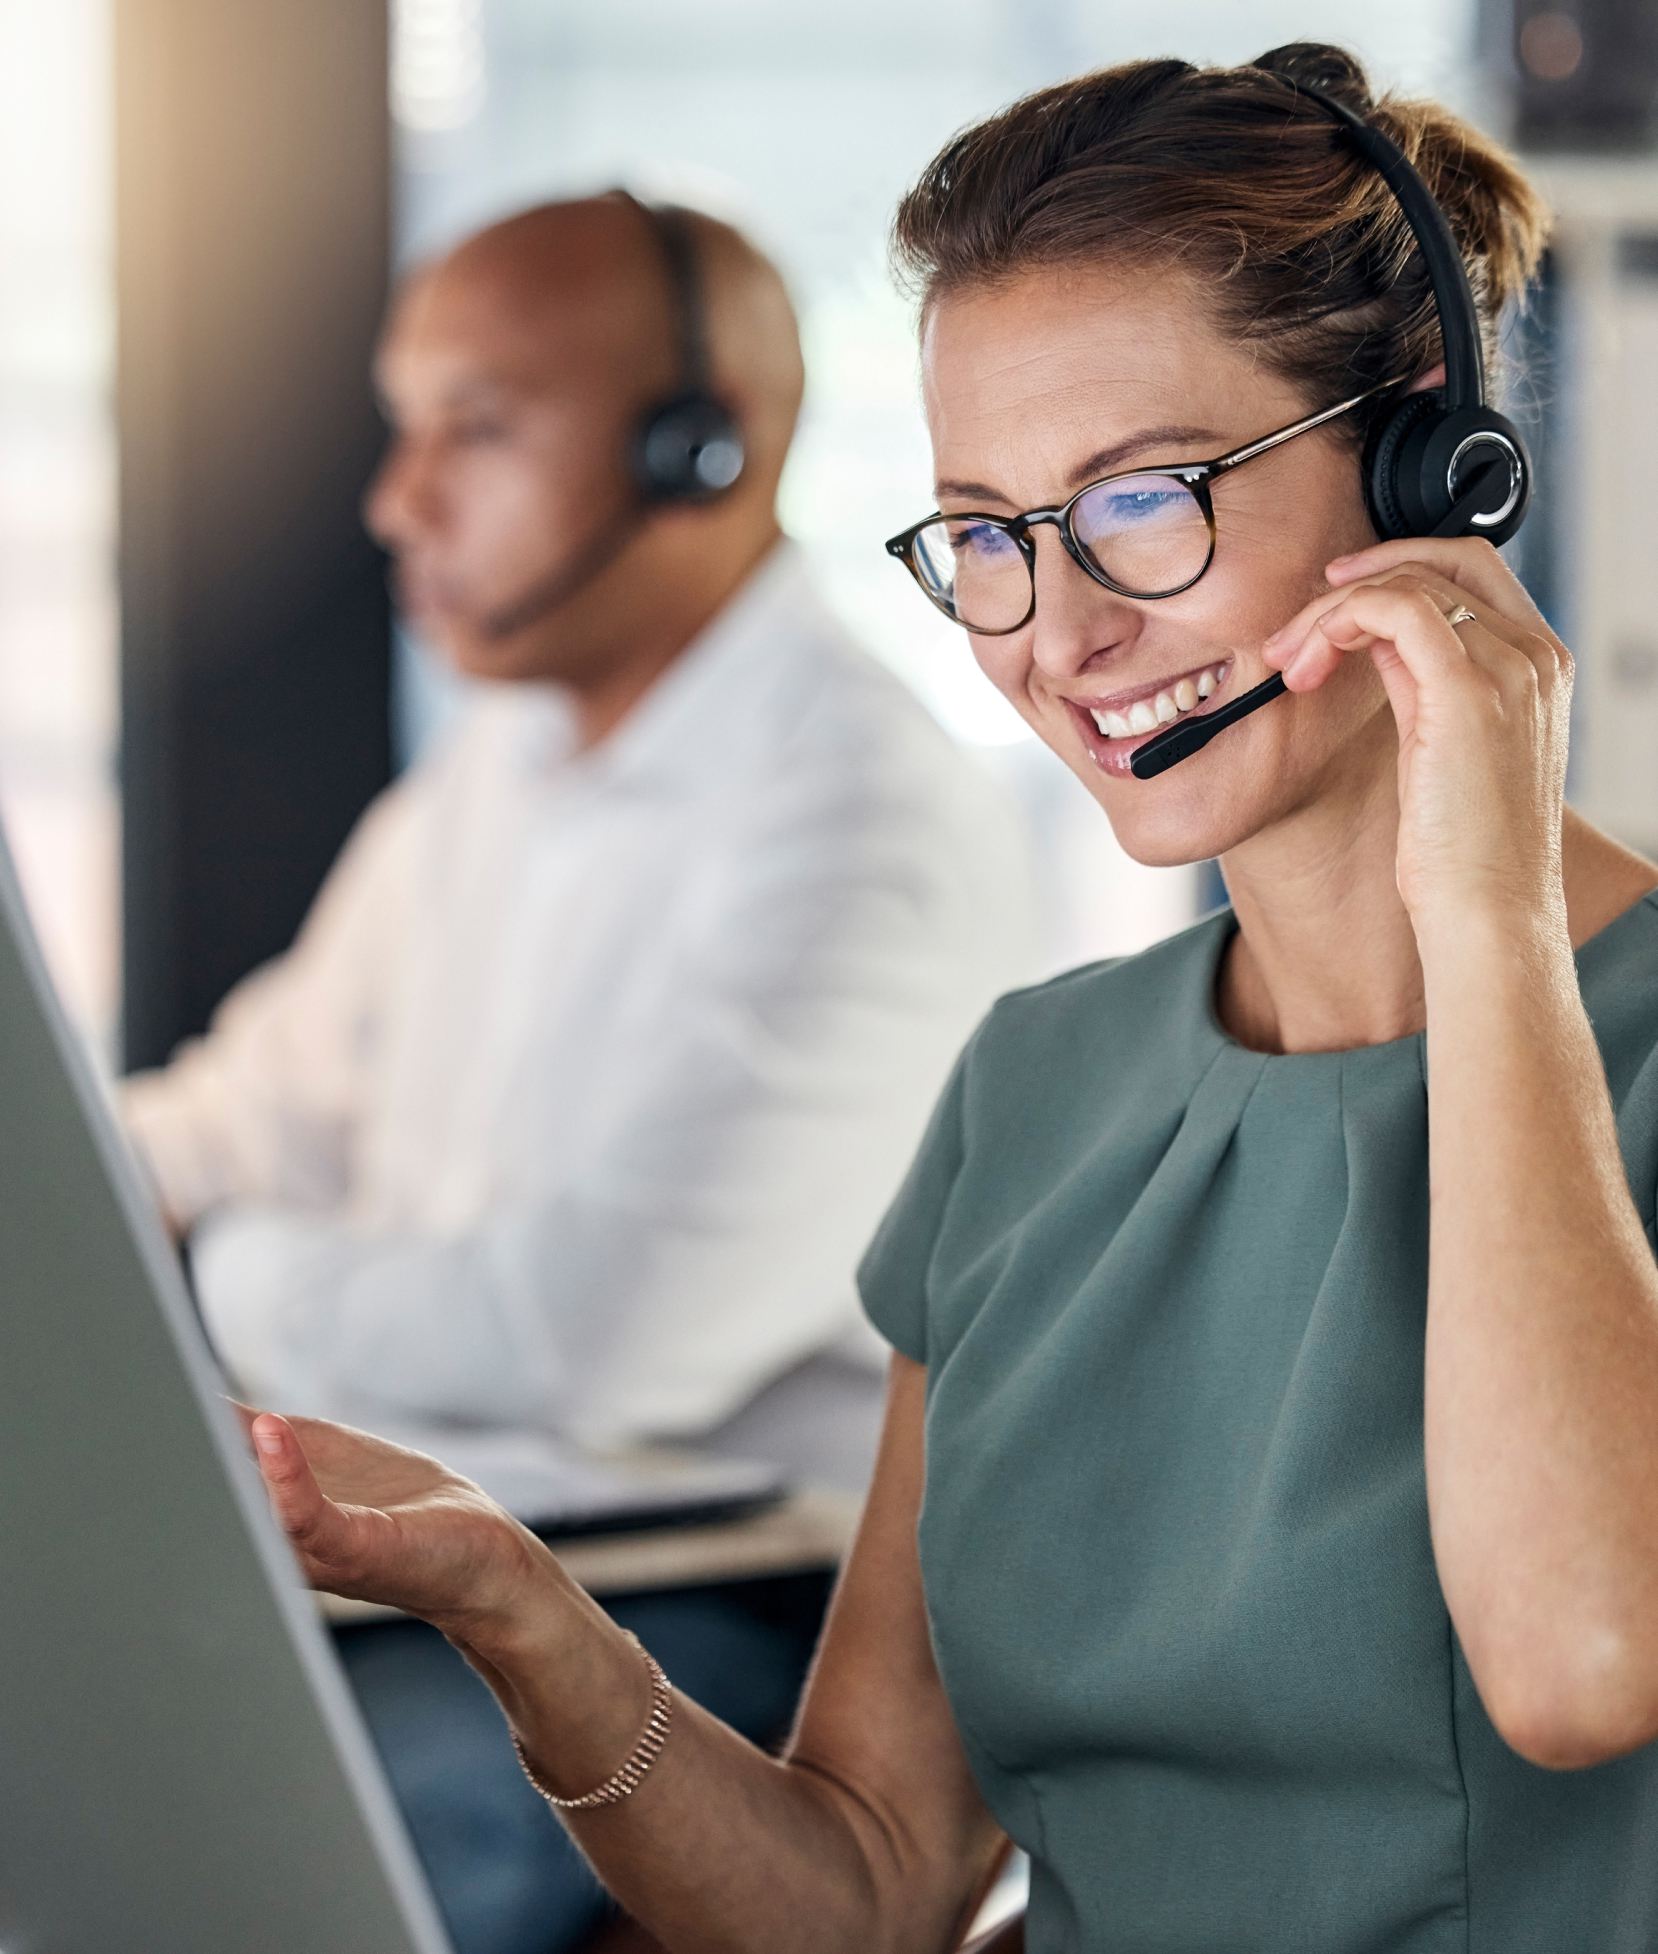 Customer service, call center and crm with a woman consultant working in a telemarketing office. Support, computer and sales with a female consulting using a headset for help, assist or communication